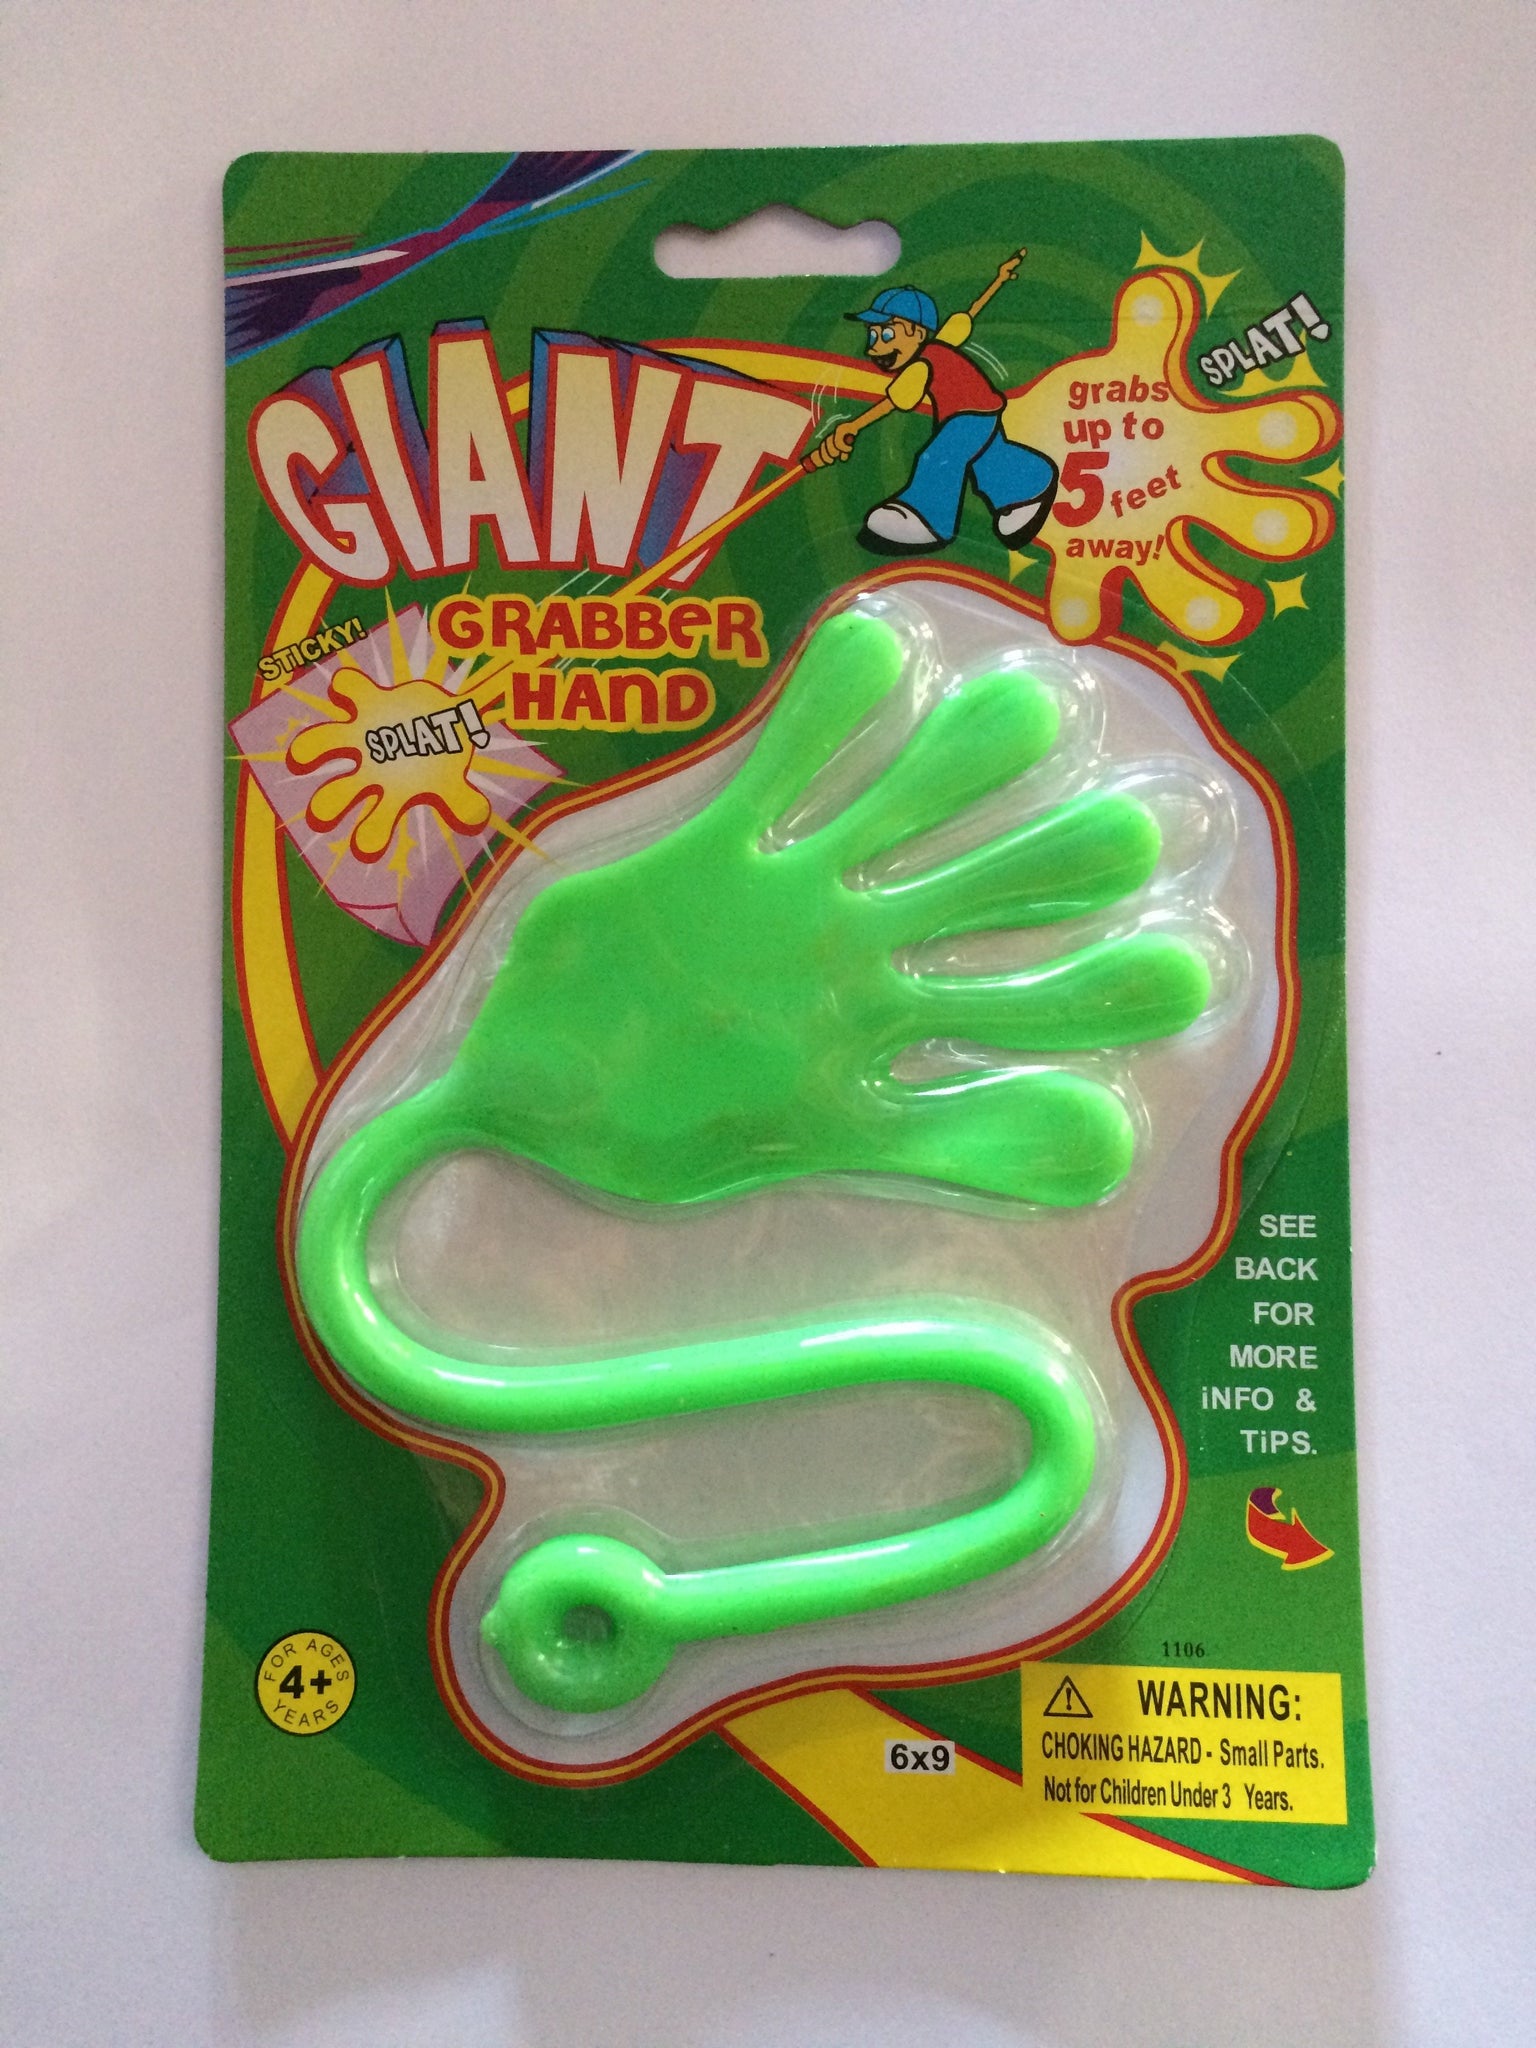 Giant Grabber Sticky Hand 1 Pc Assorted Colours Available